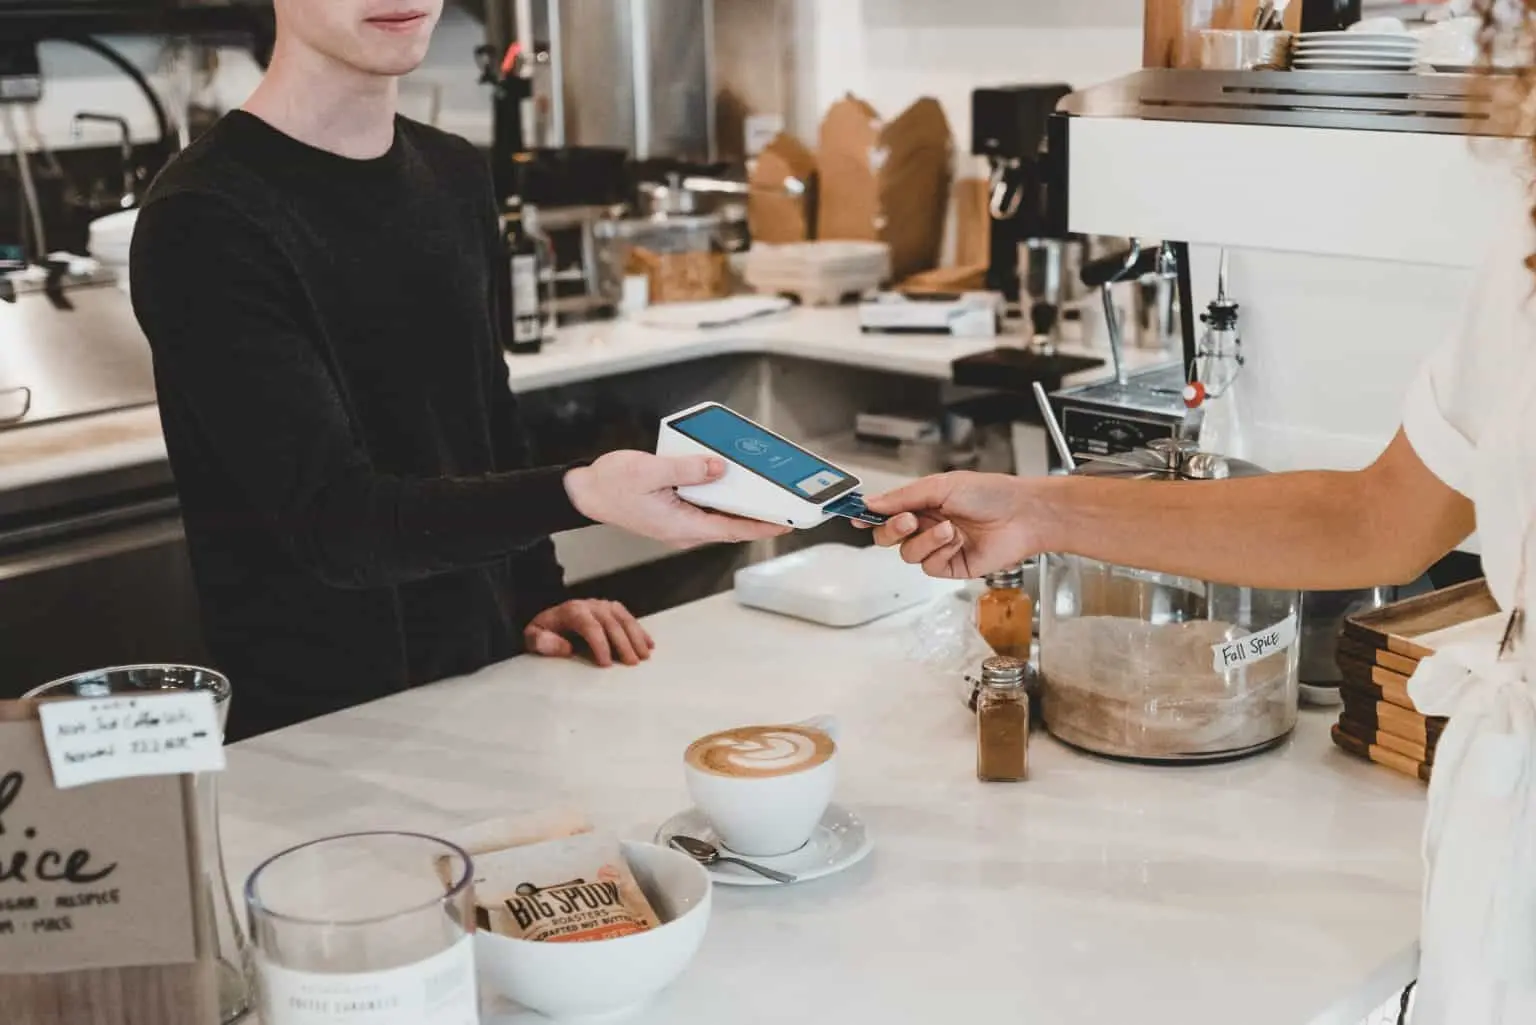 Customer paying for coffee at a counter using a credit card reader